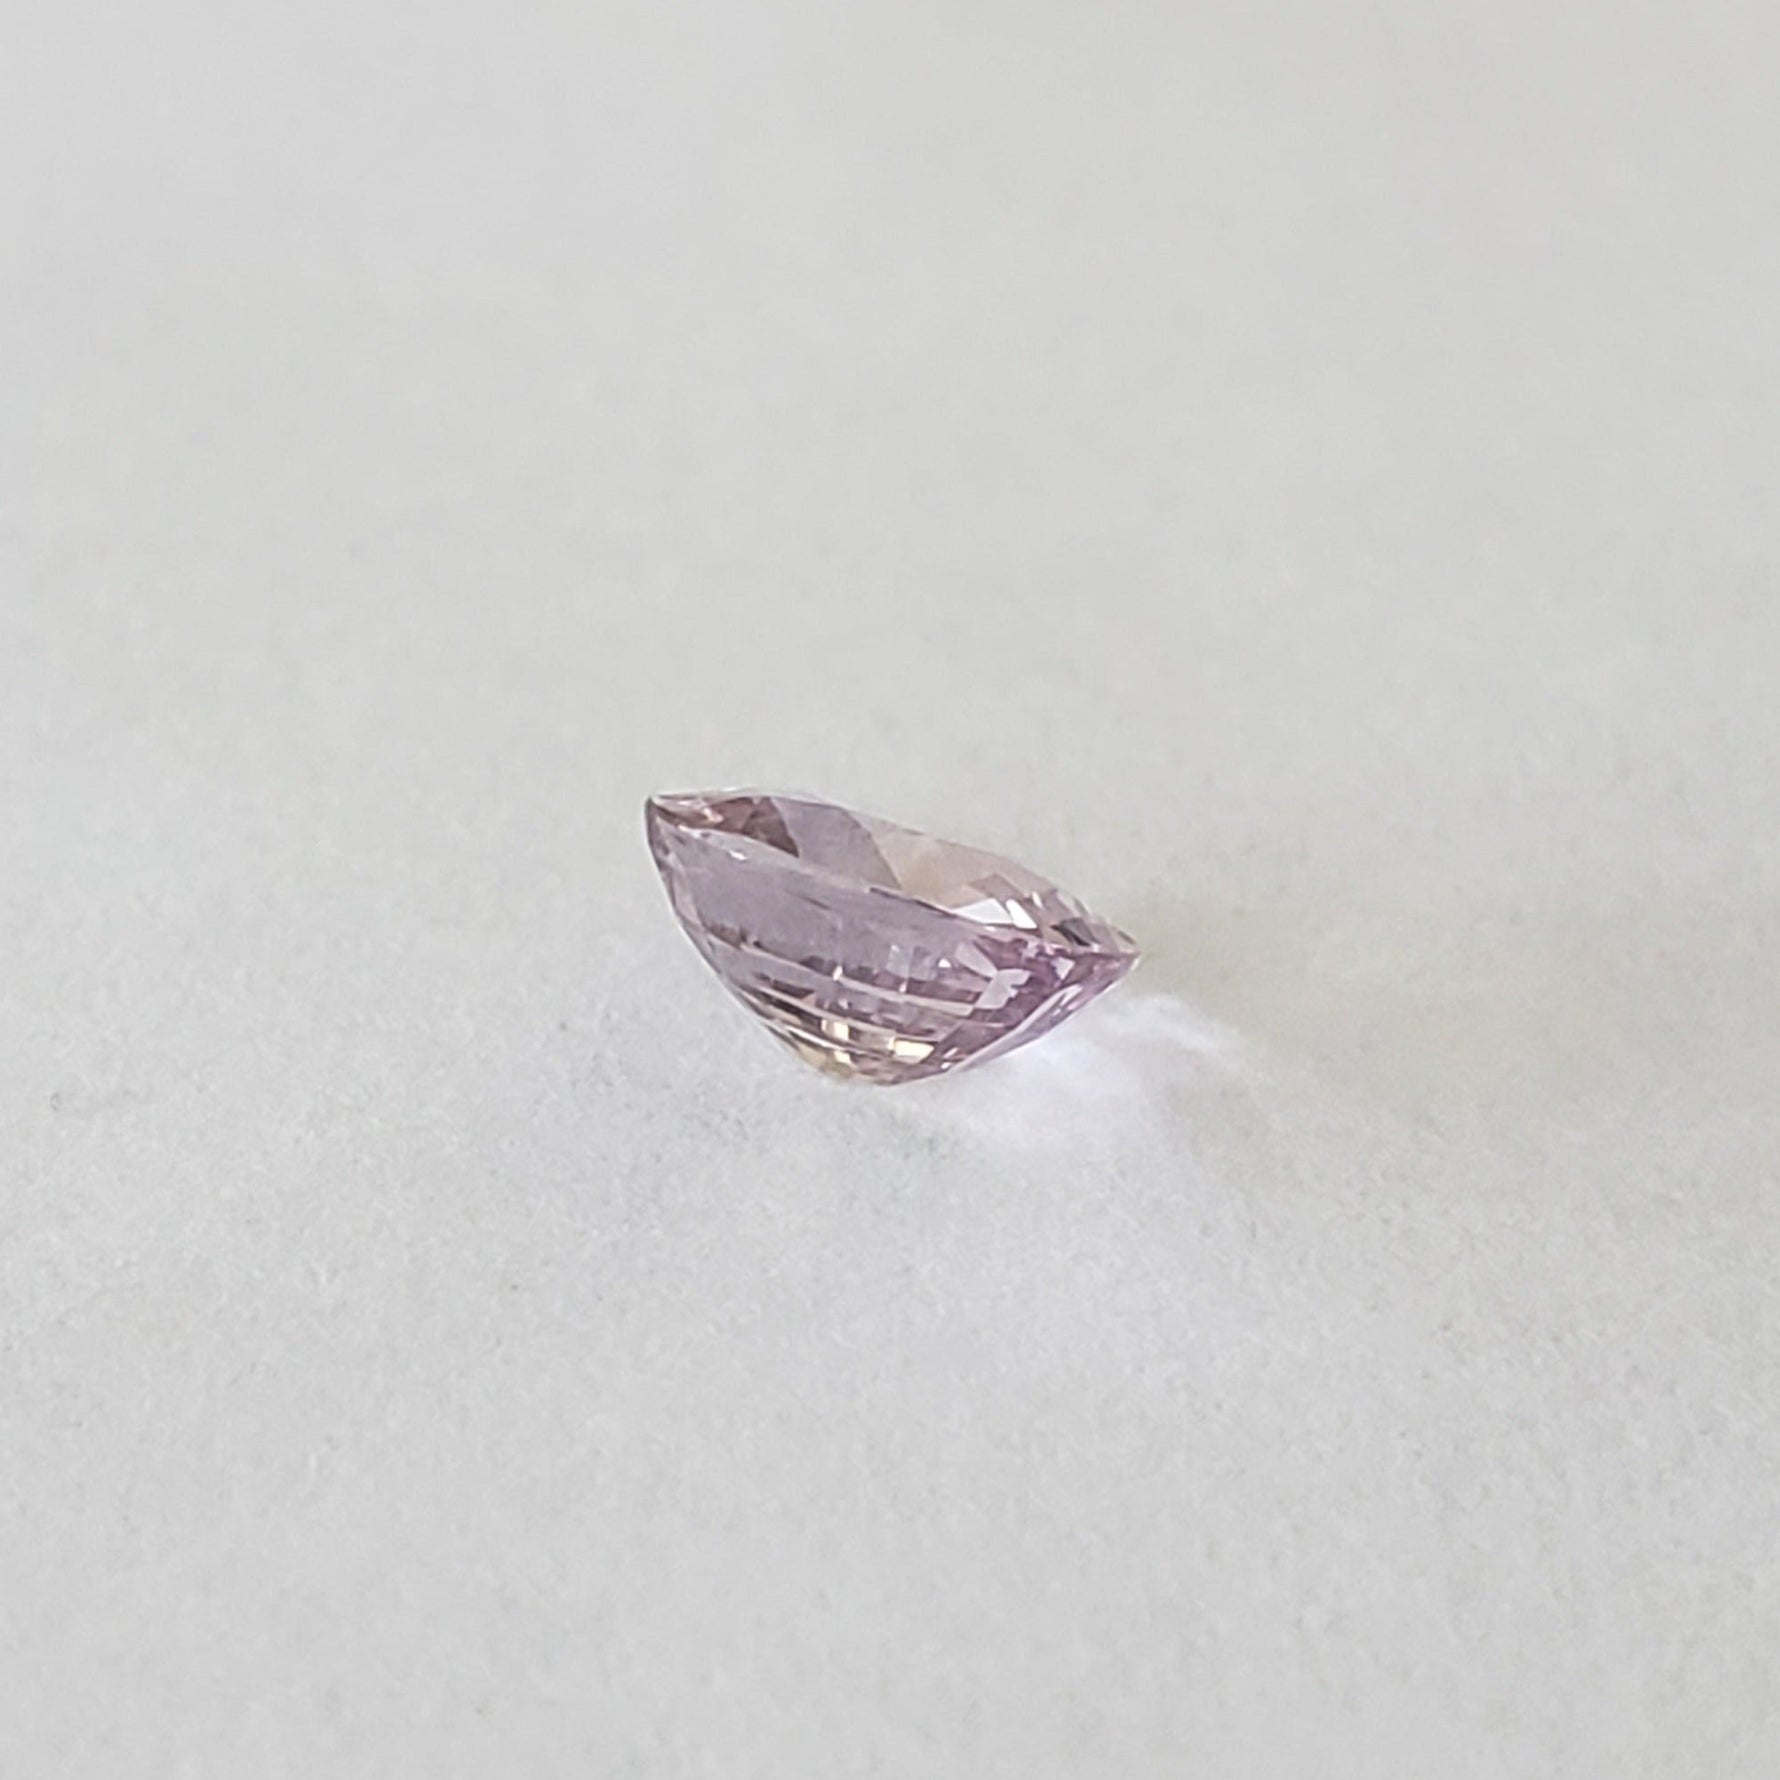 Spinel | Oval Cut | Purple Pink | Natural | 6.5x5.5mm | Myanmar